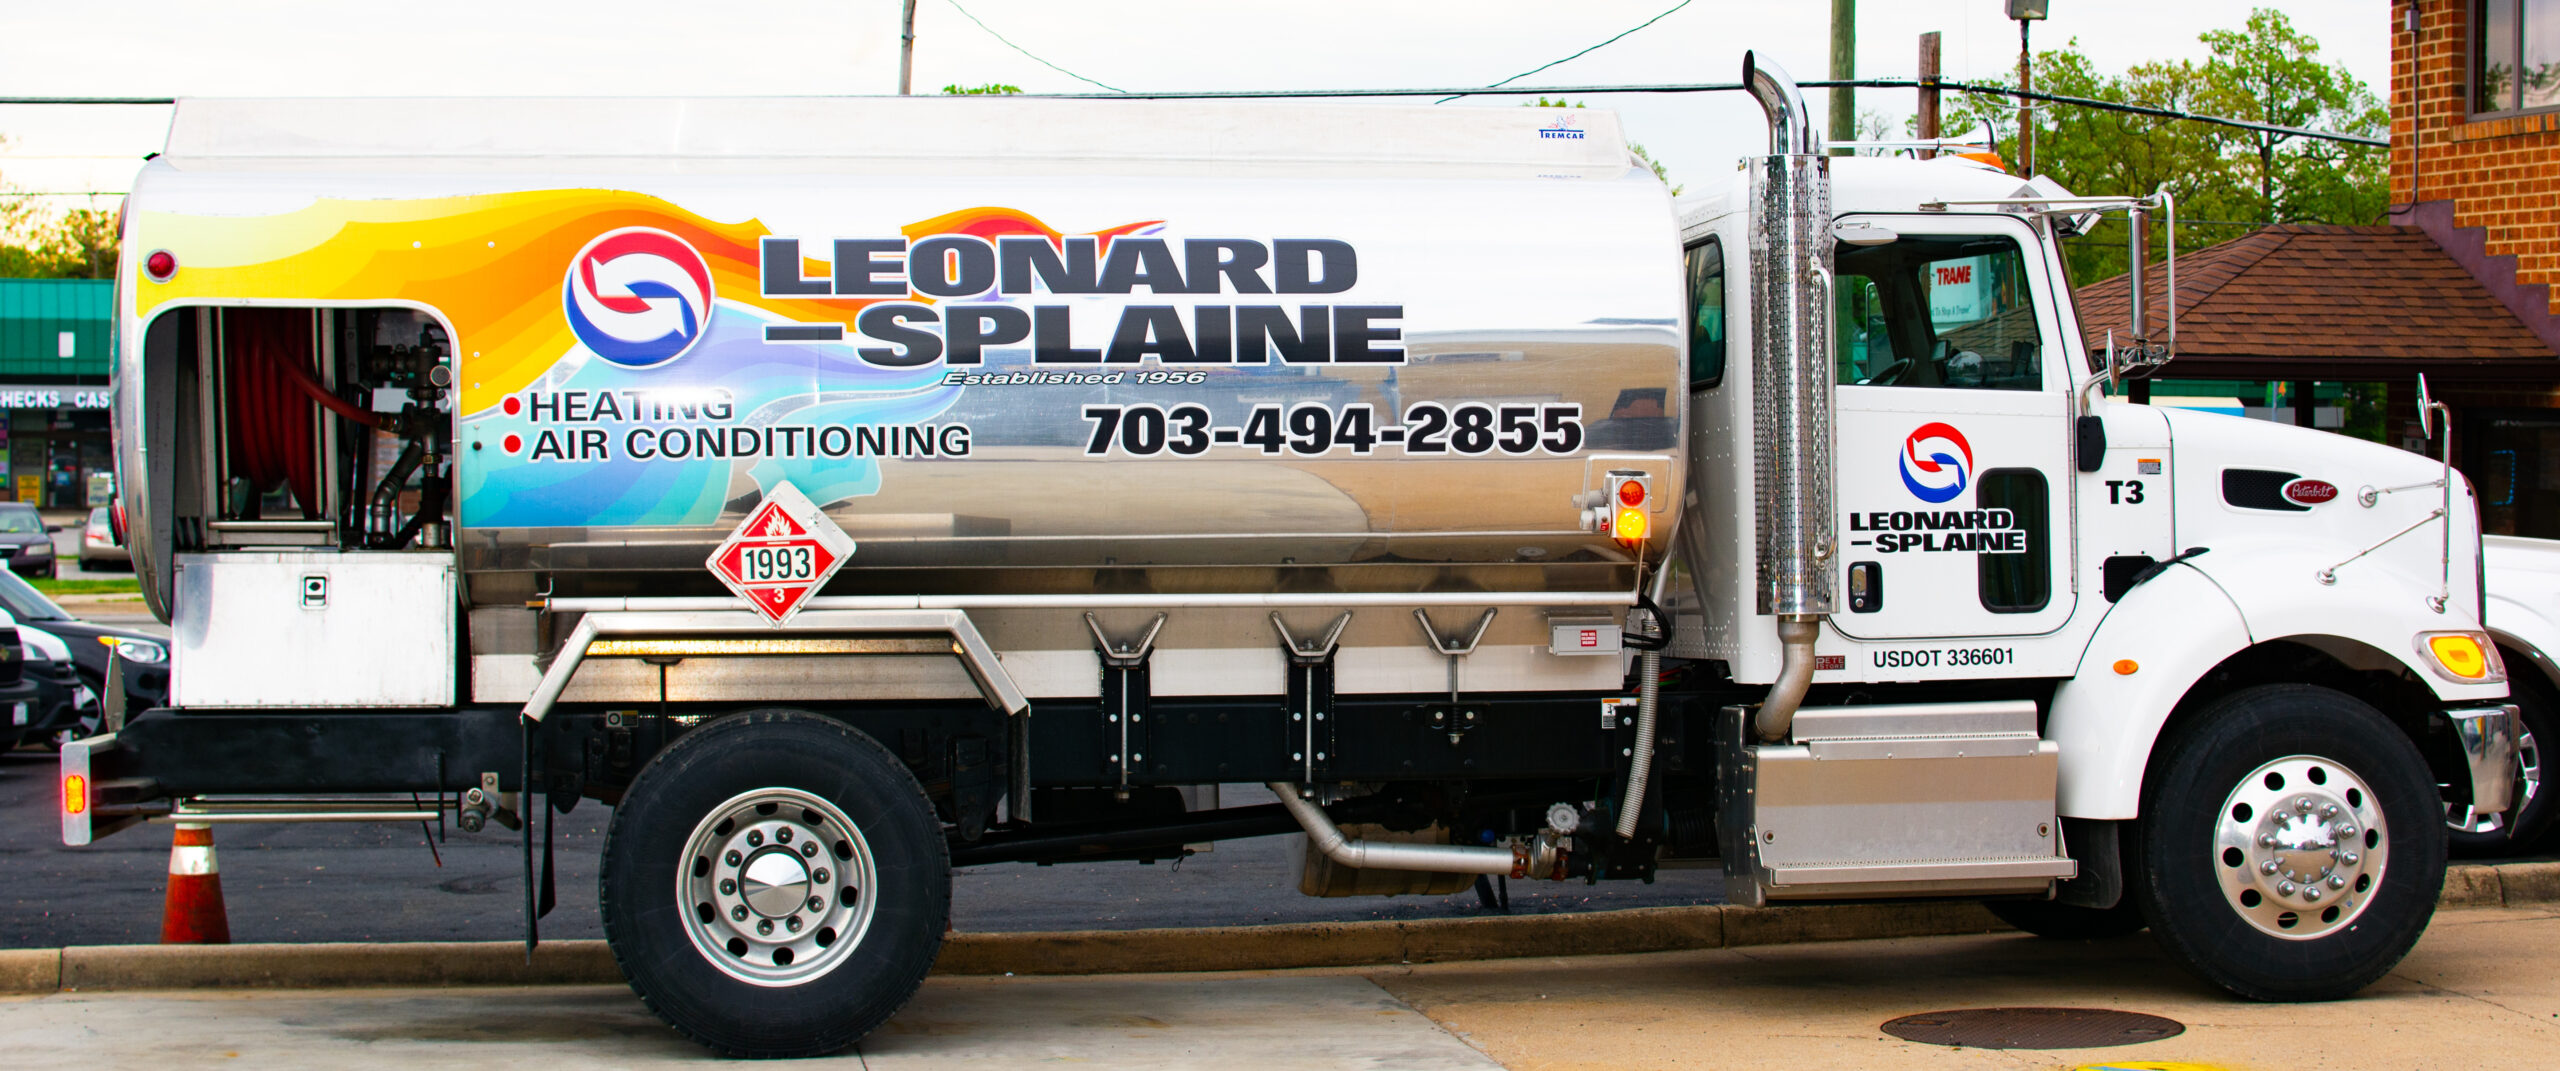 Leonard Splaine Oil delivery truck for heating and off road purposes in northern virginia